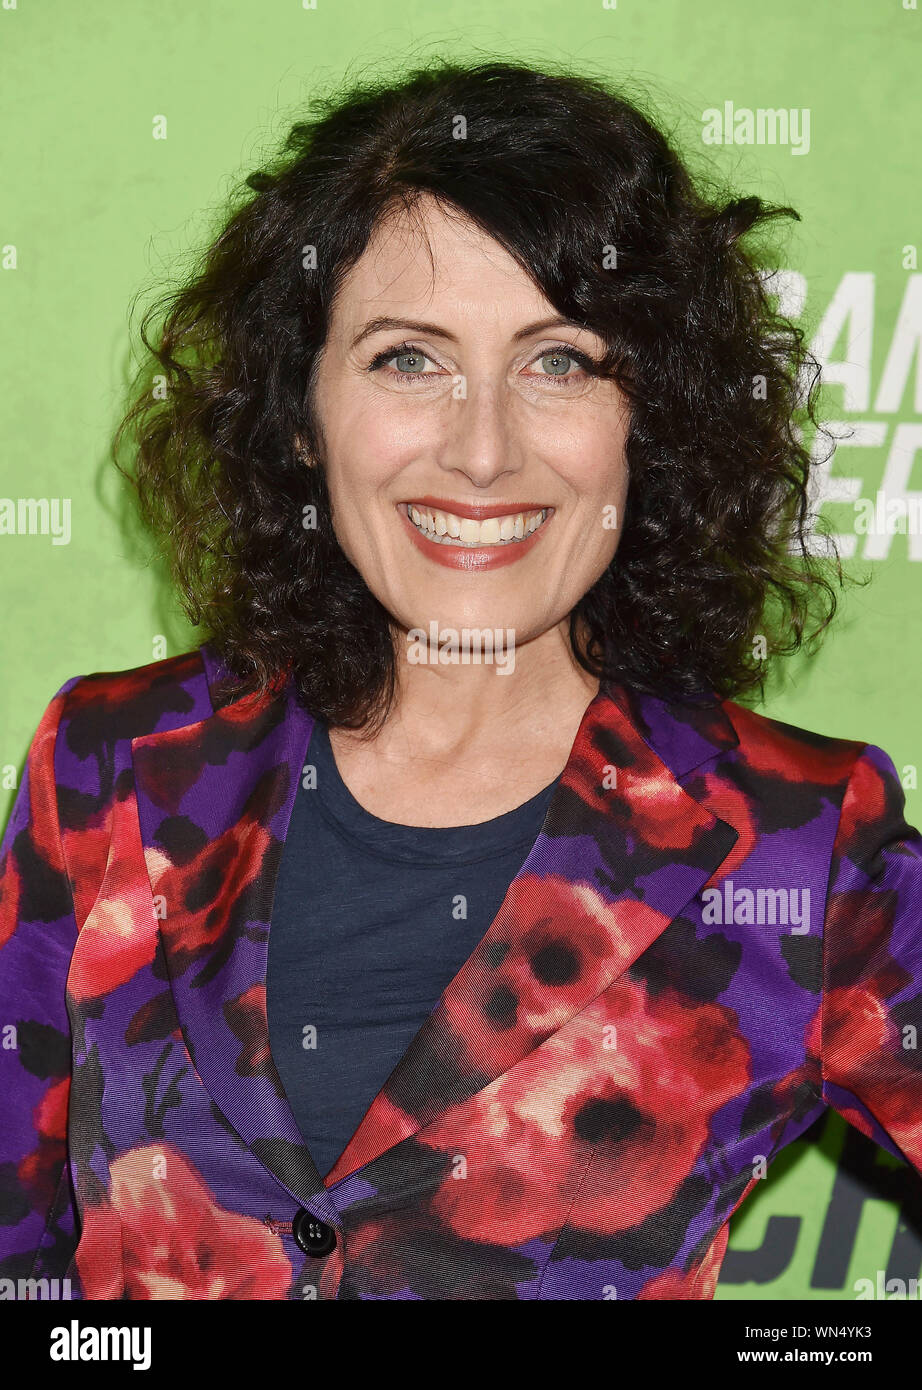 HOLLYWOOD, CA - SEPTEMBER 04: Lisa Edelstein  attends the LA Premiere Of 'The Game Changers' at ArcLight Hollywood on September 04, 2019 in Hollywood, California. Stock Photo